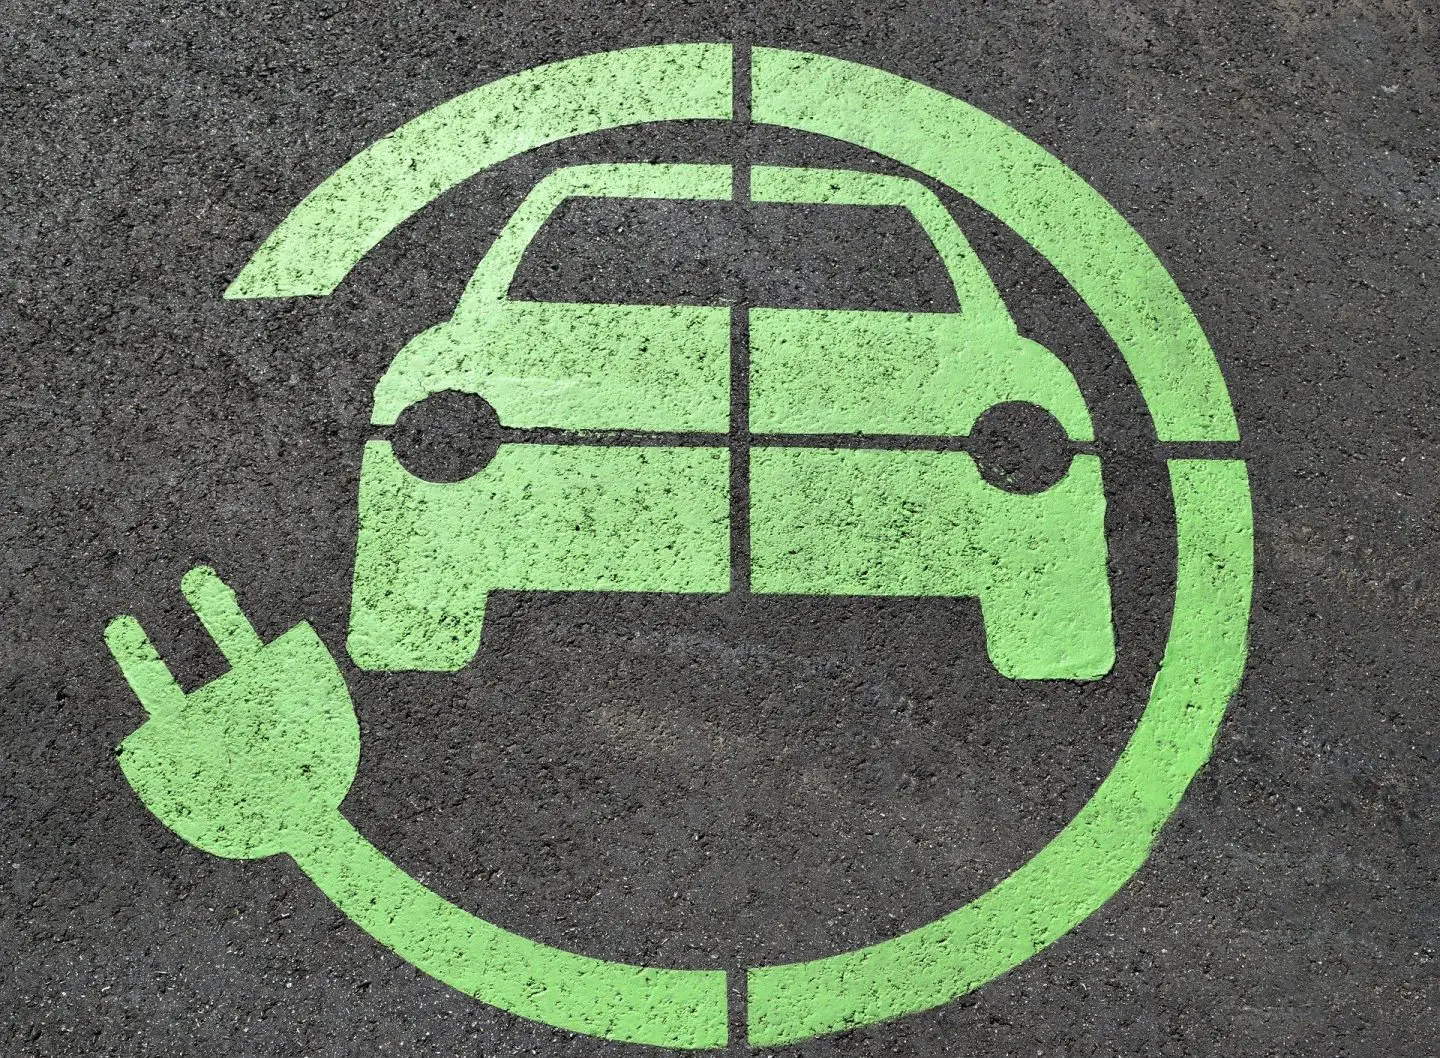 An electric car charging symbol in green